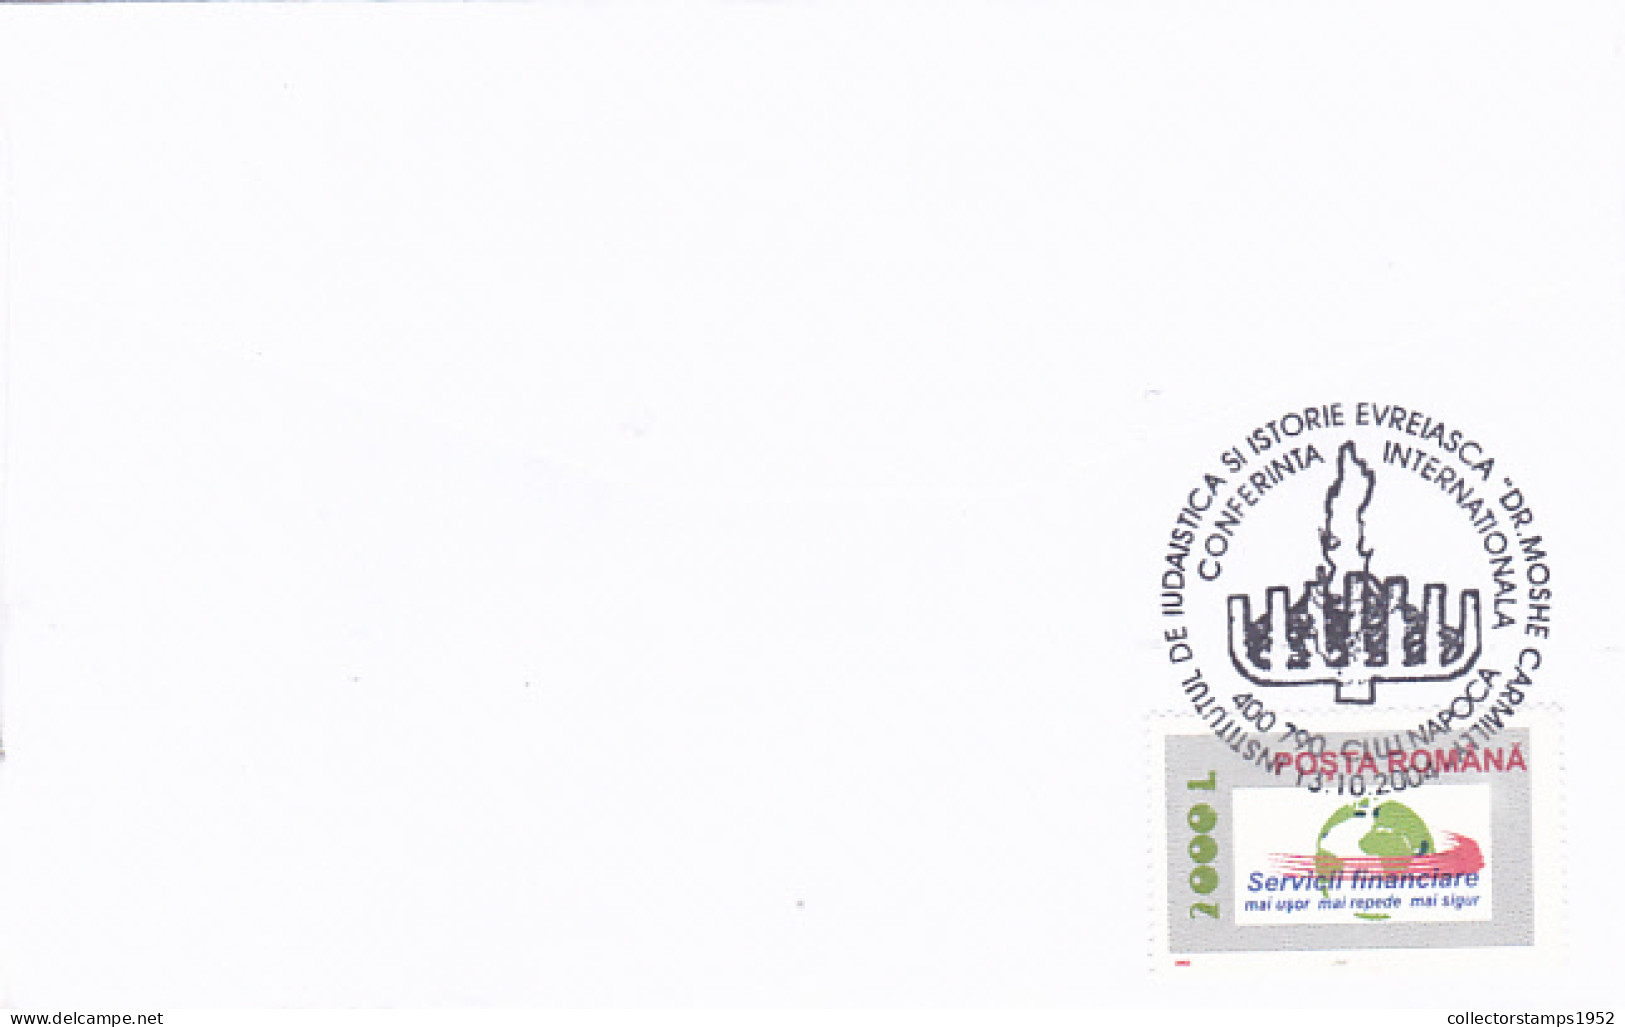 MOSHE CARMILLY JEWISH INSTITUTE, CONFERENCE, JEWISH, RELIGION, SPECIAL COVER, OVERPRINT STAMP, 2004, ROMANIA - Jewish